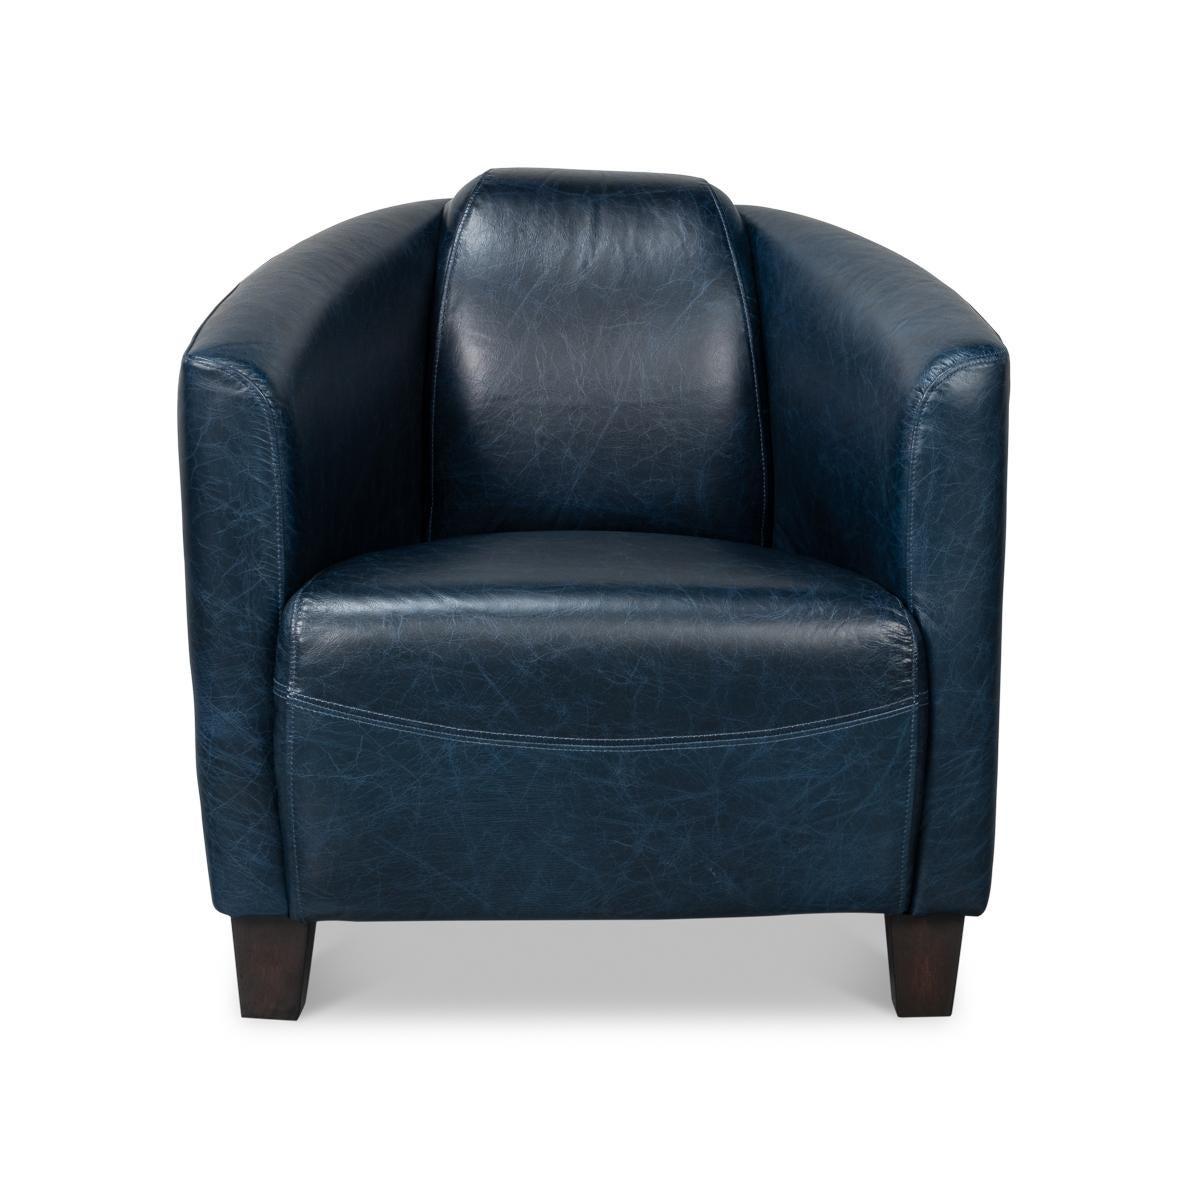 Crafted of luxurious top-grain leather in a wonderful blue hue, this stylish and comfortable chair is perfect for your den, library, or living room.
Color variation is common and acceptable on vintage leather.
Dimensions: 28